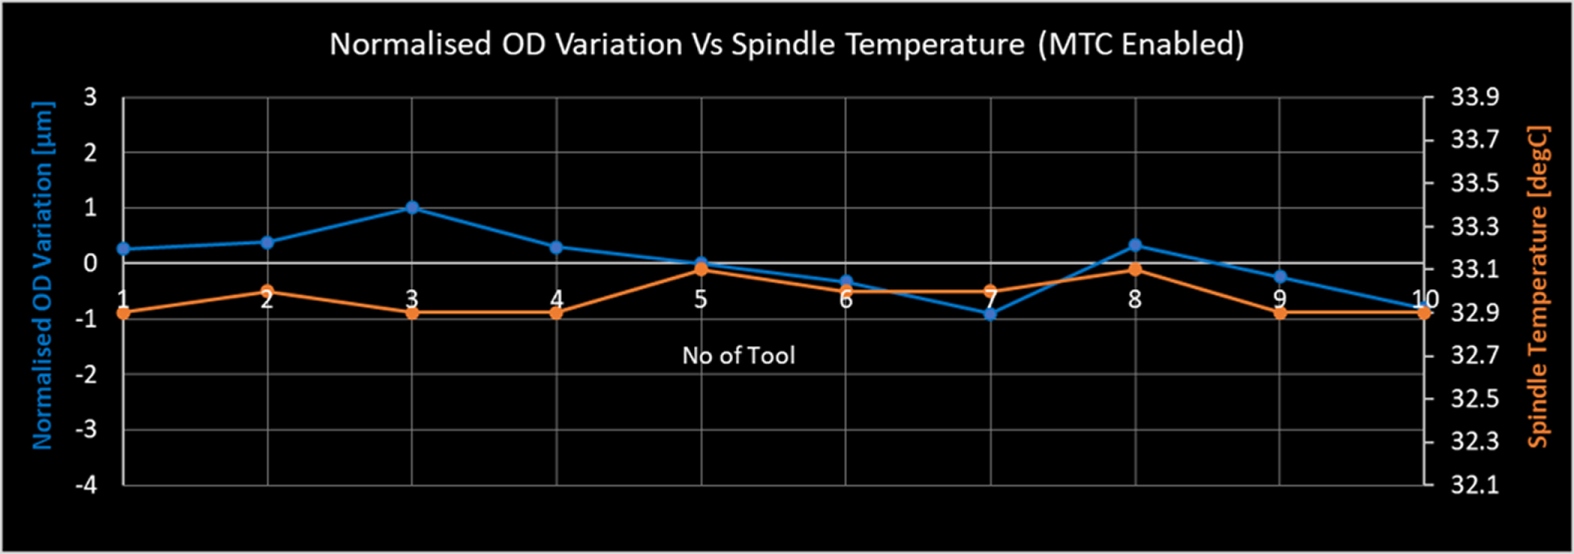 #2 Normalized OD Variation vs Spindle Temperature (MTC Enabled)